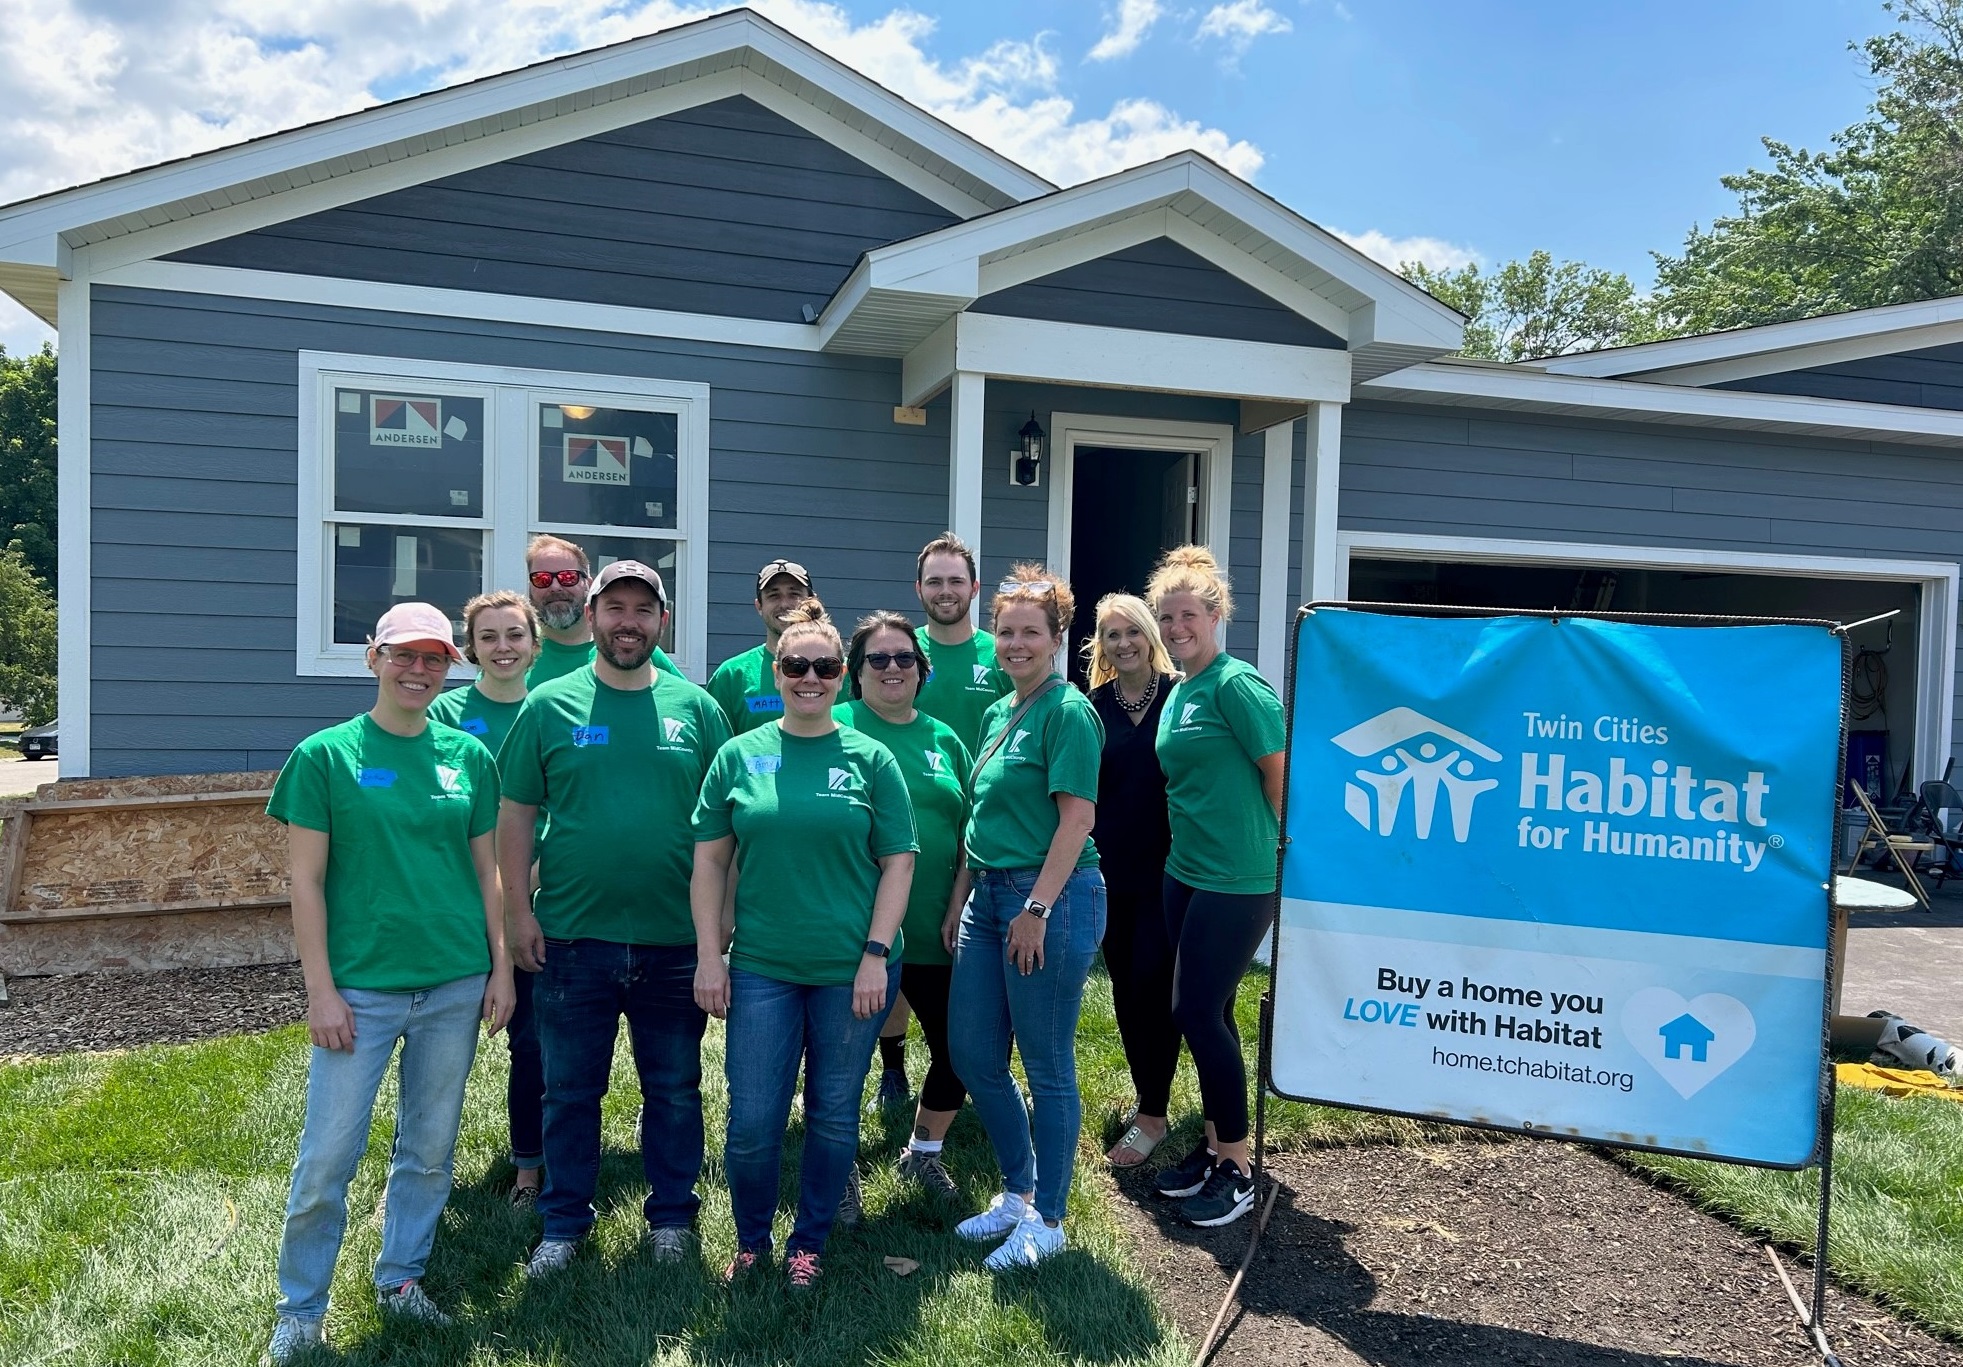 MidCountry Bank Team Members Volunteer with Twin Cities Habitat for Humanity 